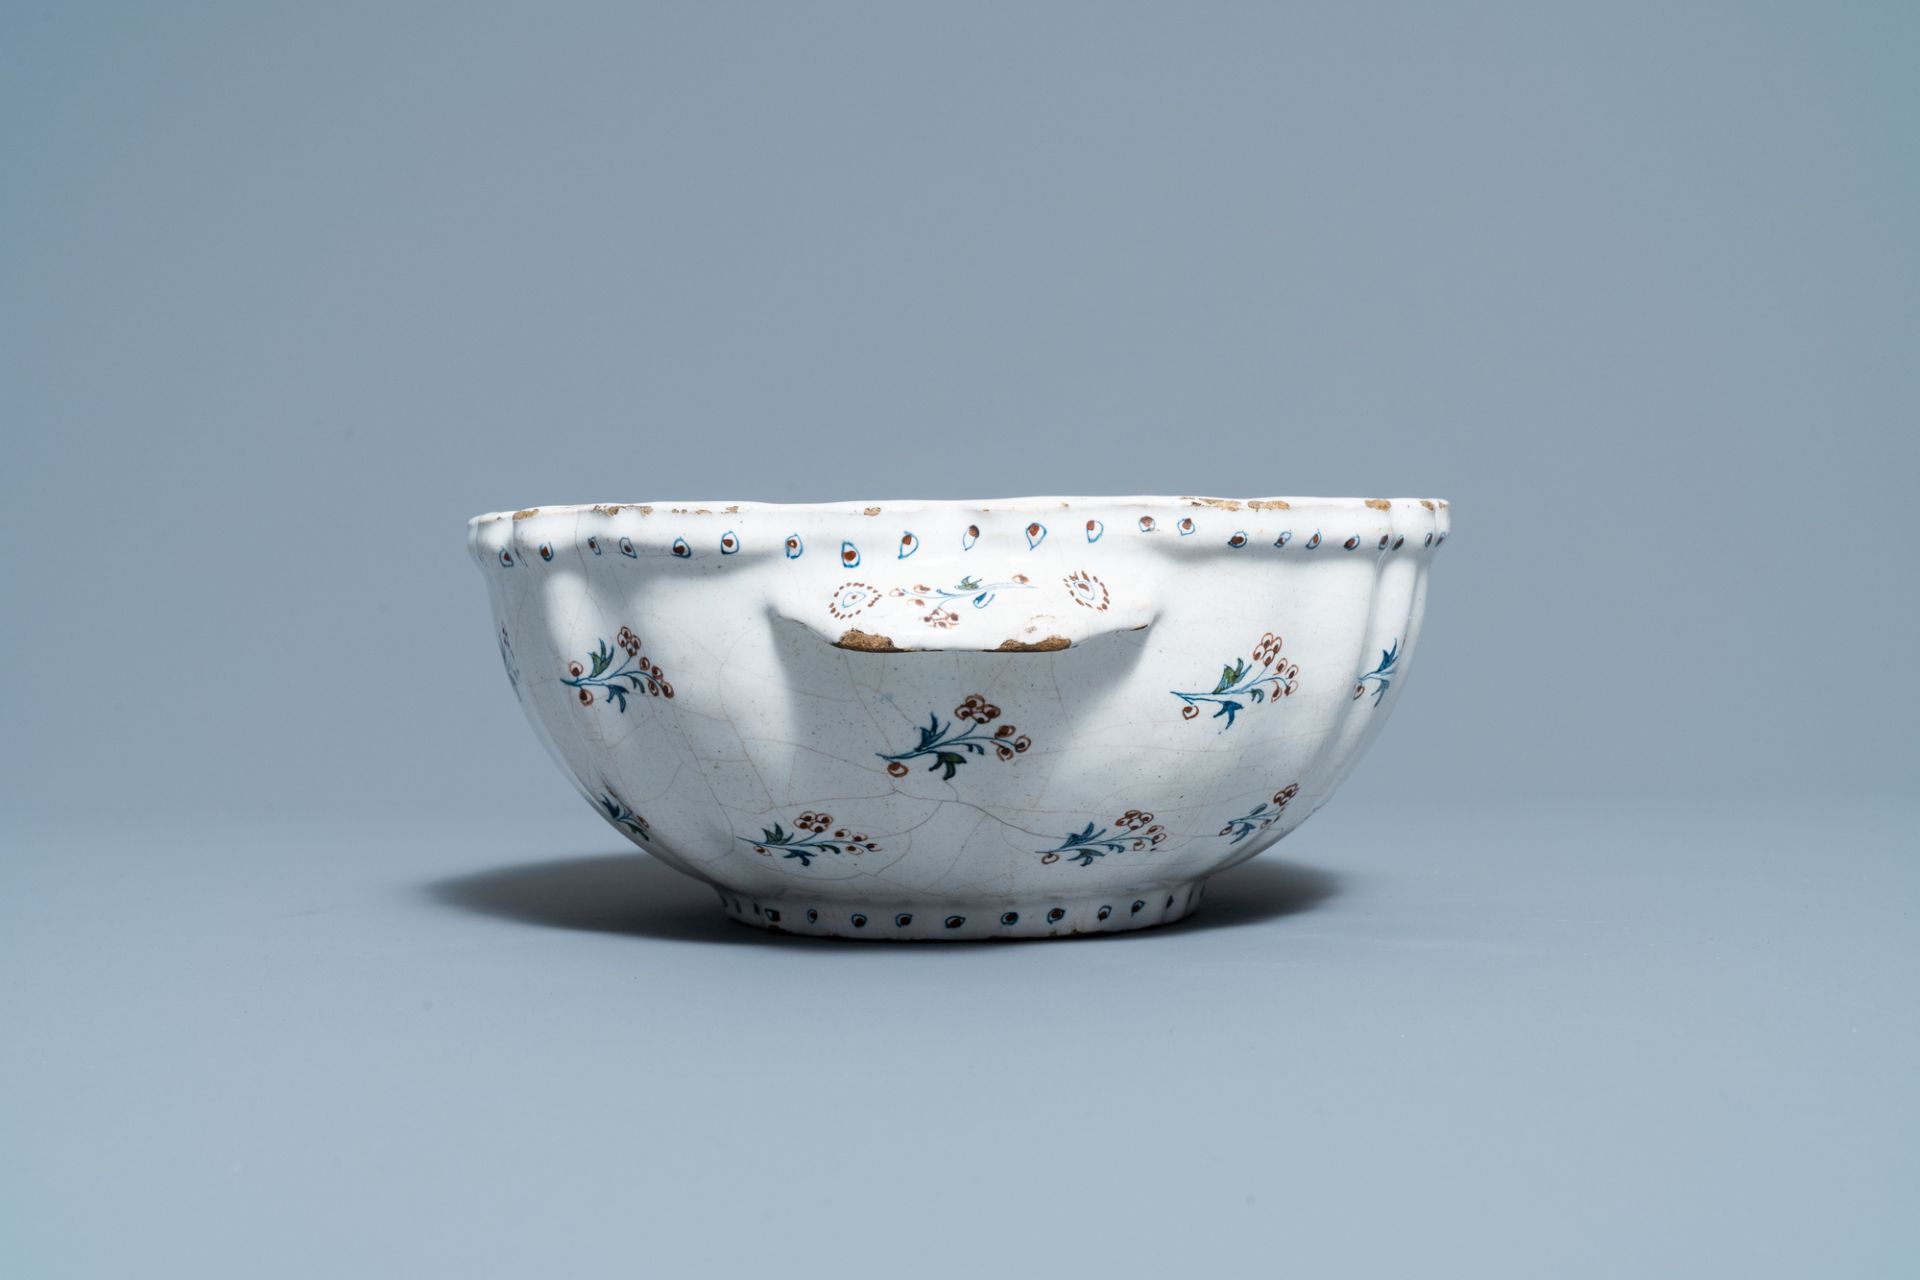 A Brussels faience basin with 'a la haie fleurie' design, 18th C. - Image 5 of 7